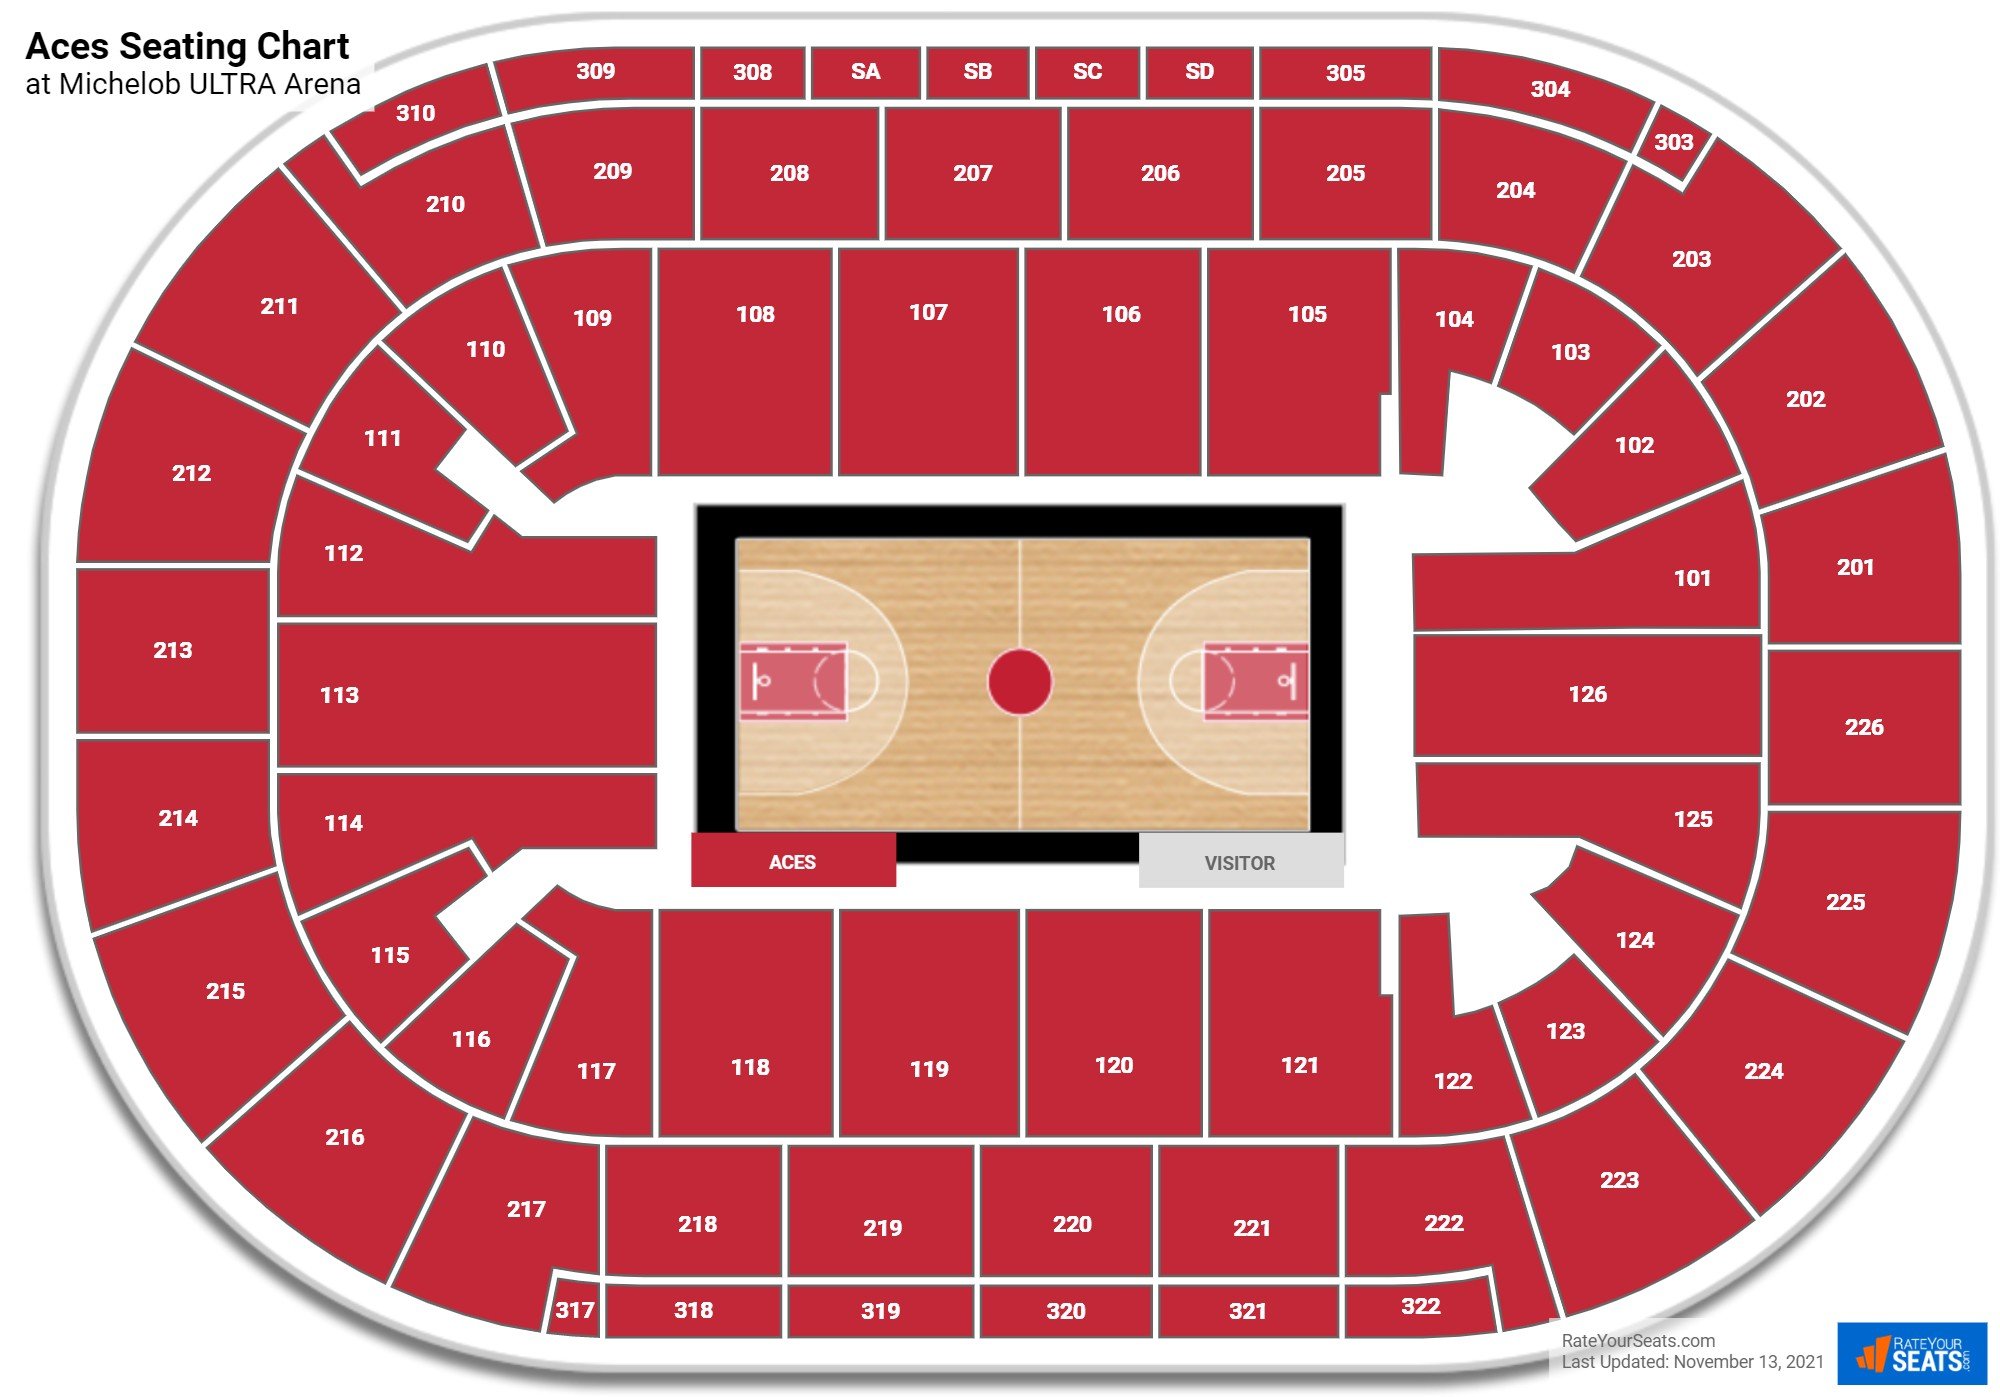 Las Vegas Aces Seating Chart at Michelob ULTRA Arena